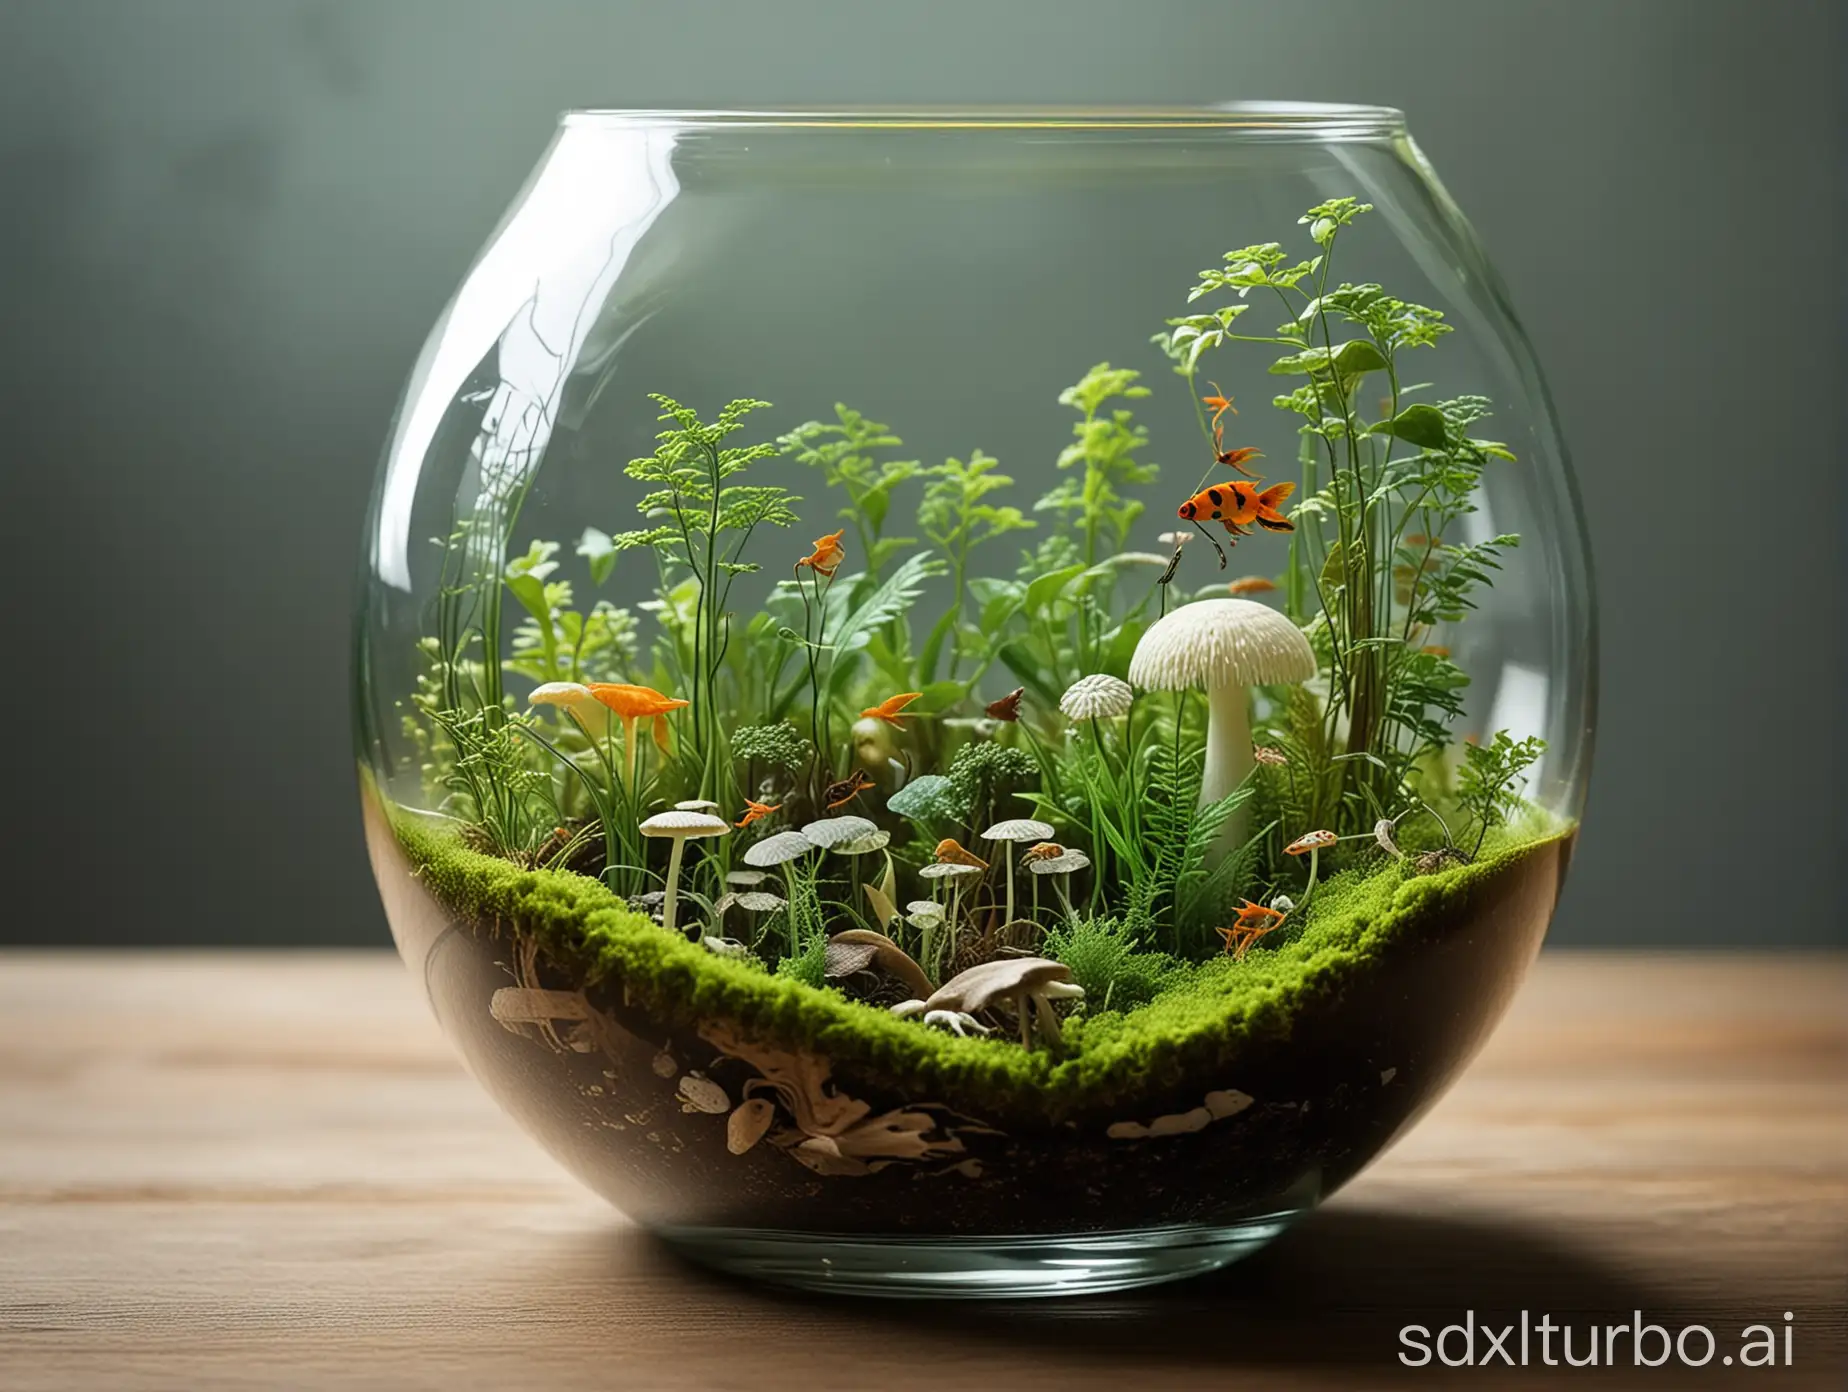 Miniature-Ecosystem-Encased-in-Glass-Captivating-Natures-Beauty-in-a-Compact-Setting